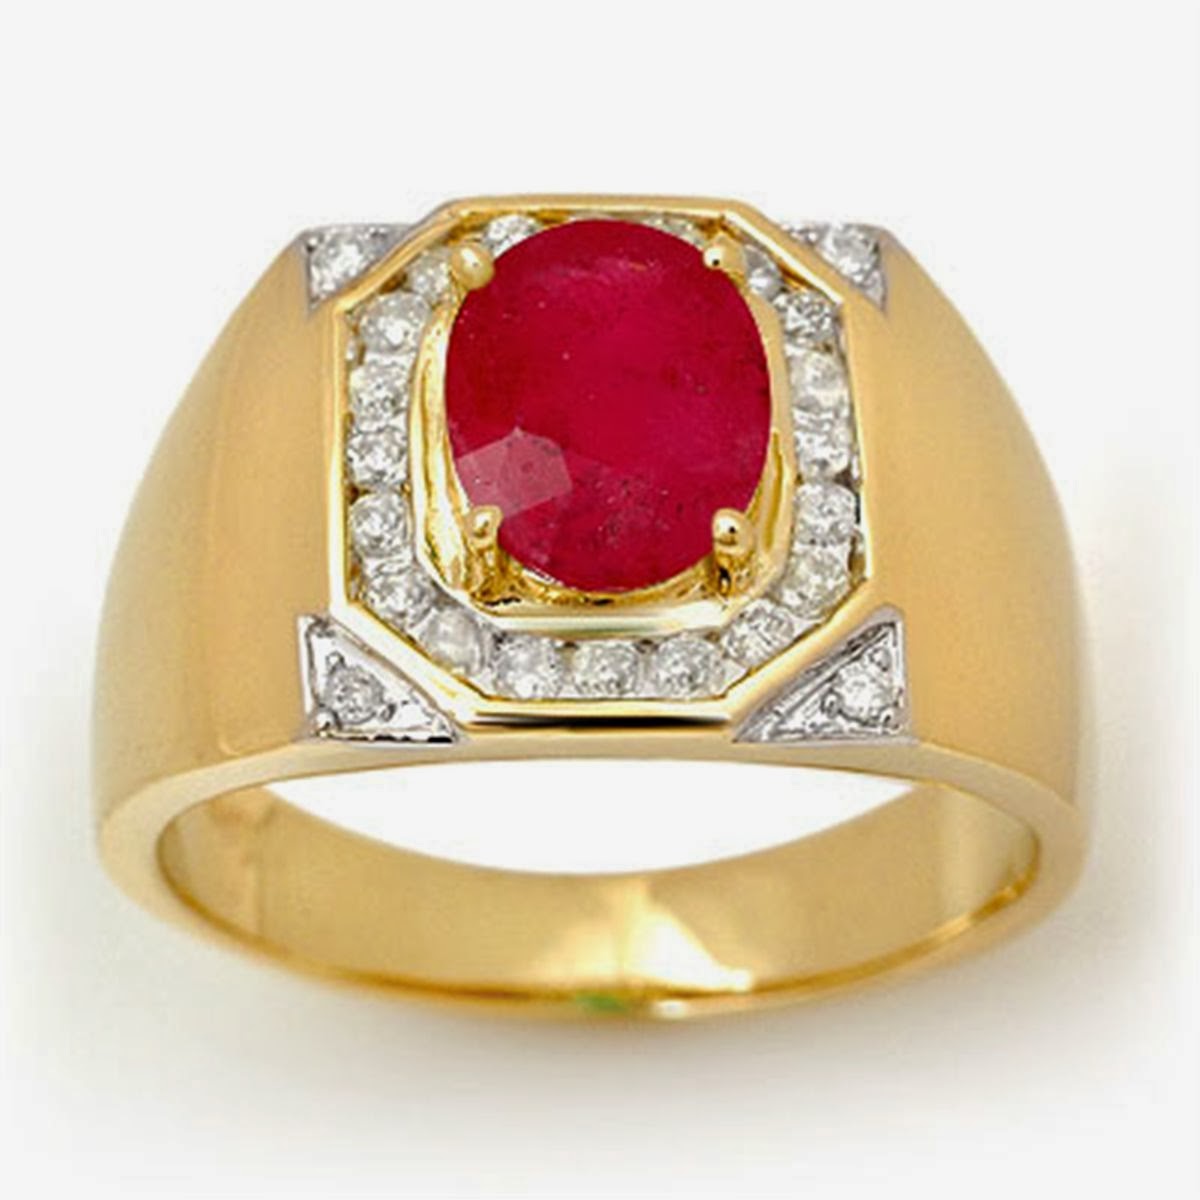 BEAUTY AND FASHION MENS WEDDiNG GOLD RINGS RUBY